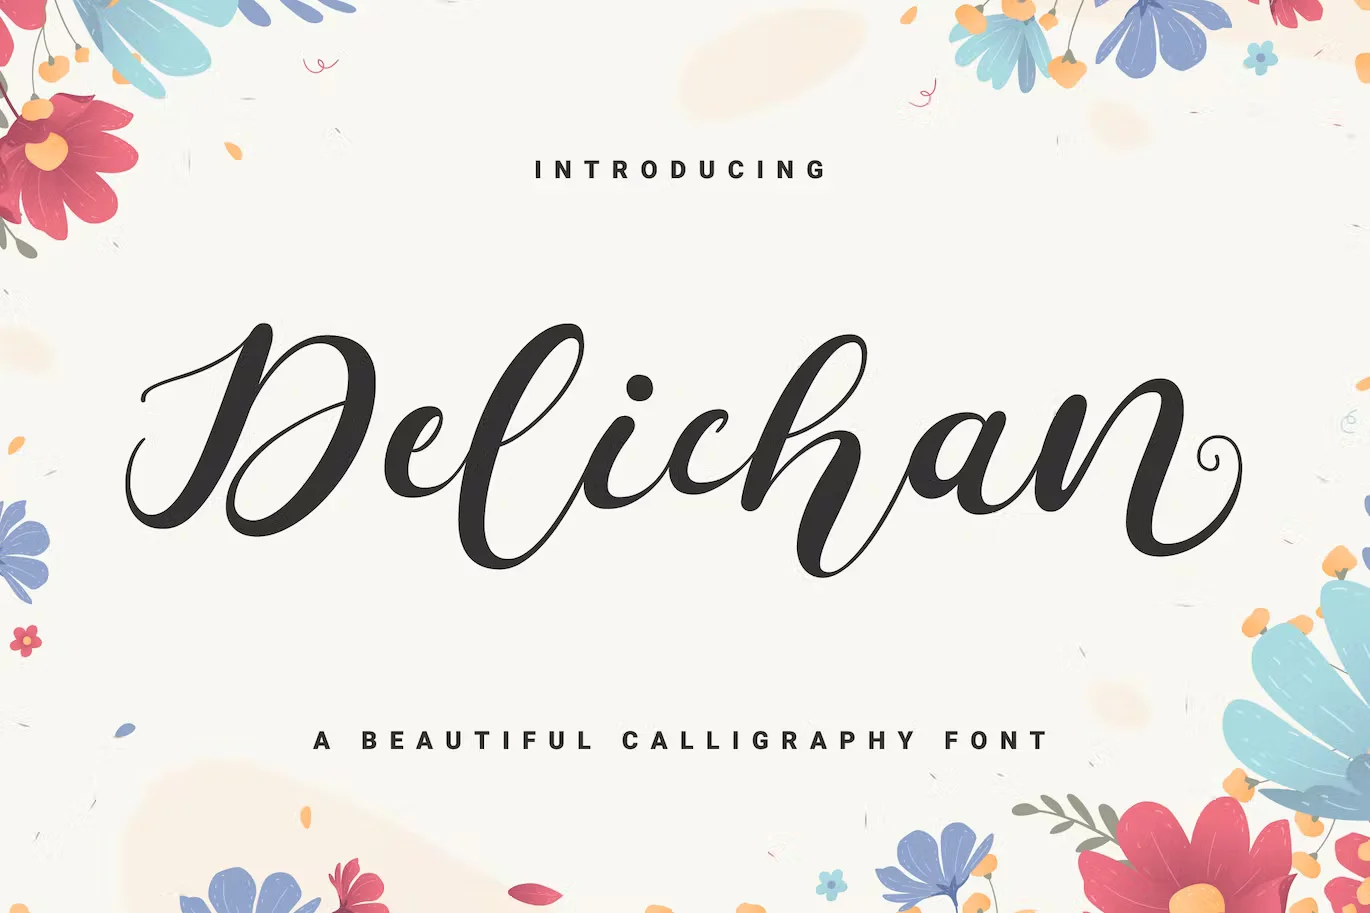 15 Gorgeous Wedding Fonts for Your Big Day